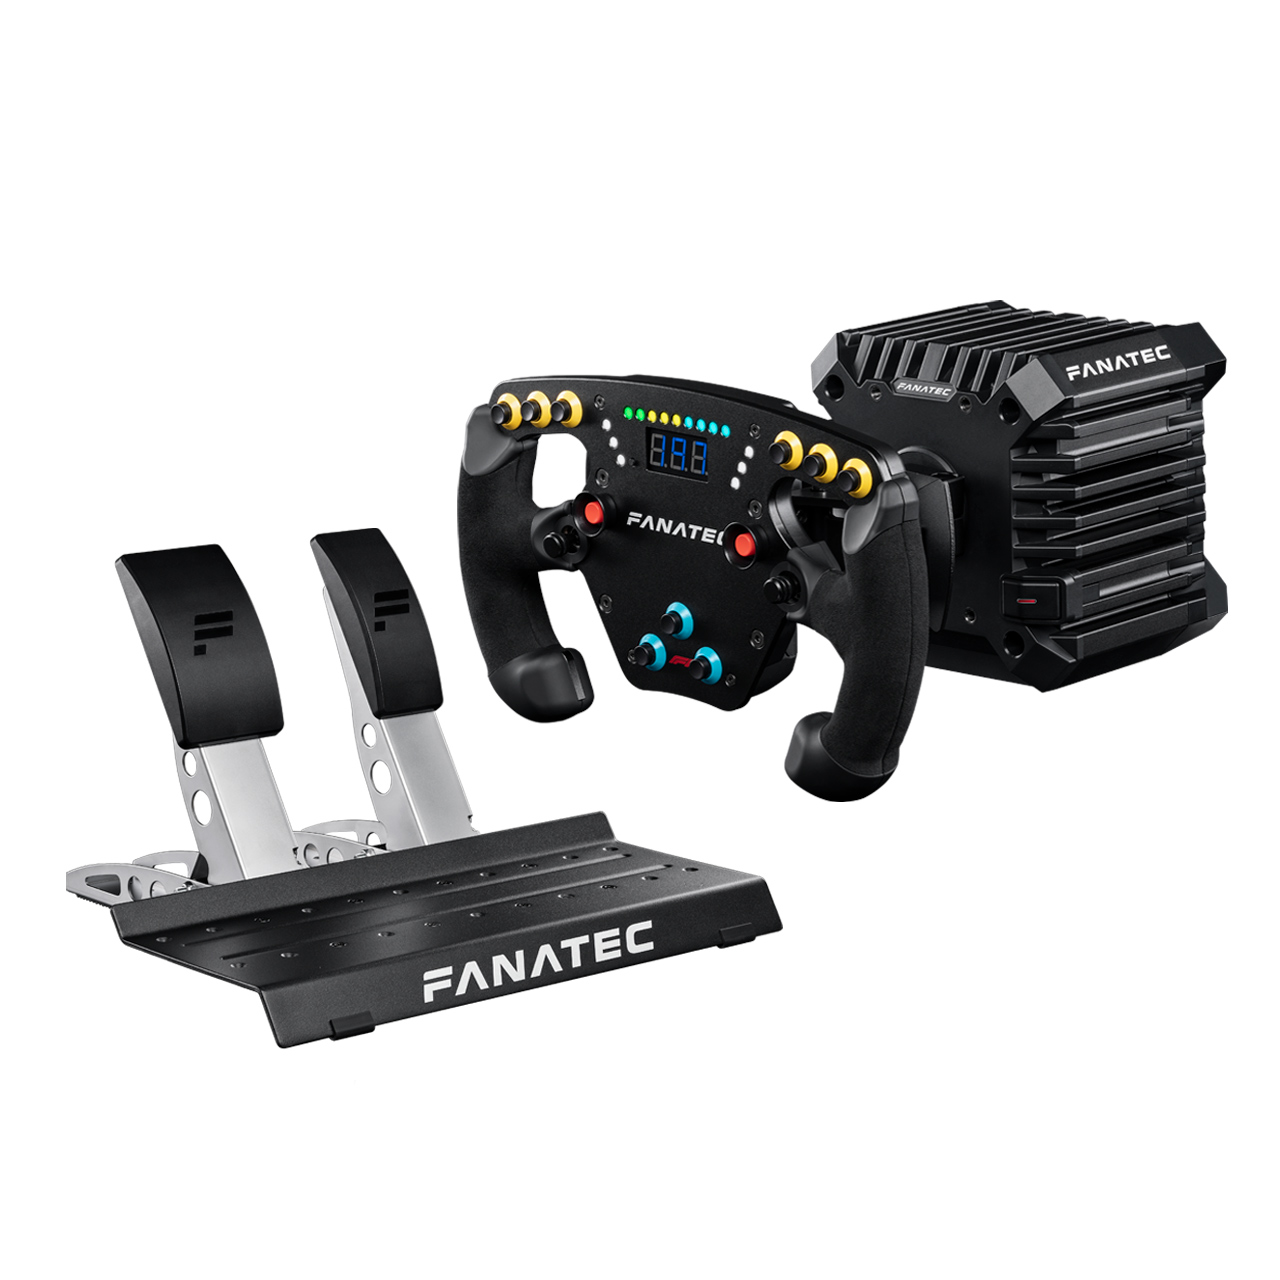 F1 Esports: Your chance to win the latest Fanatec equipment